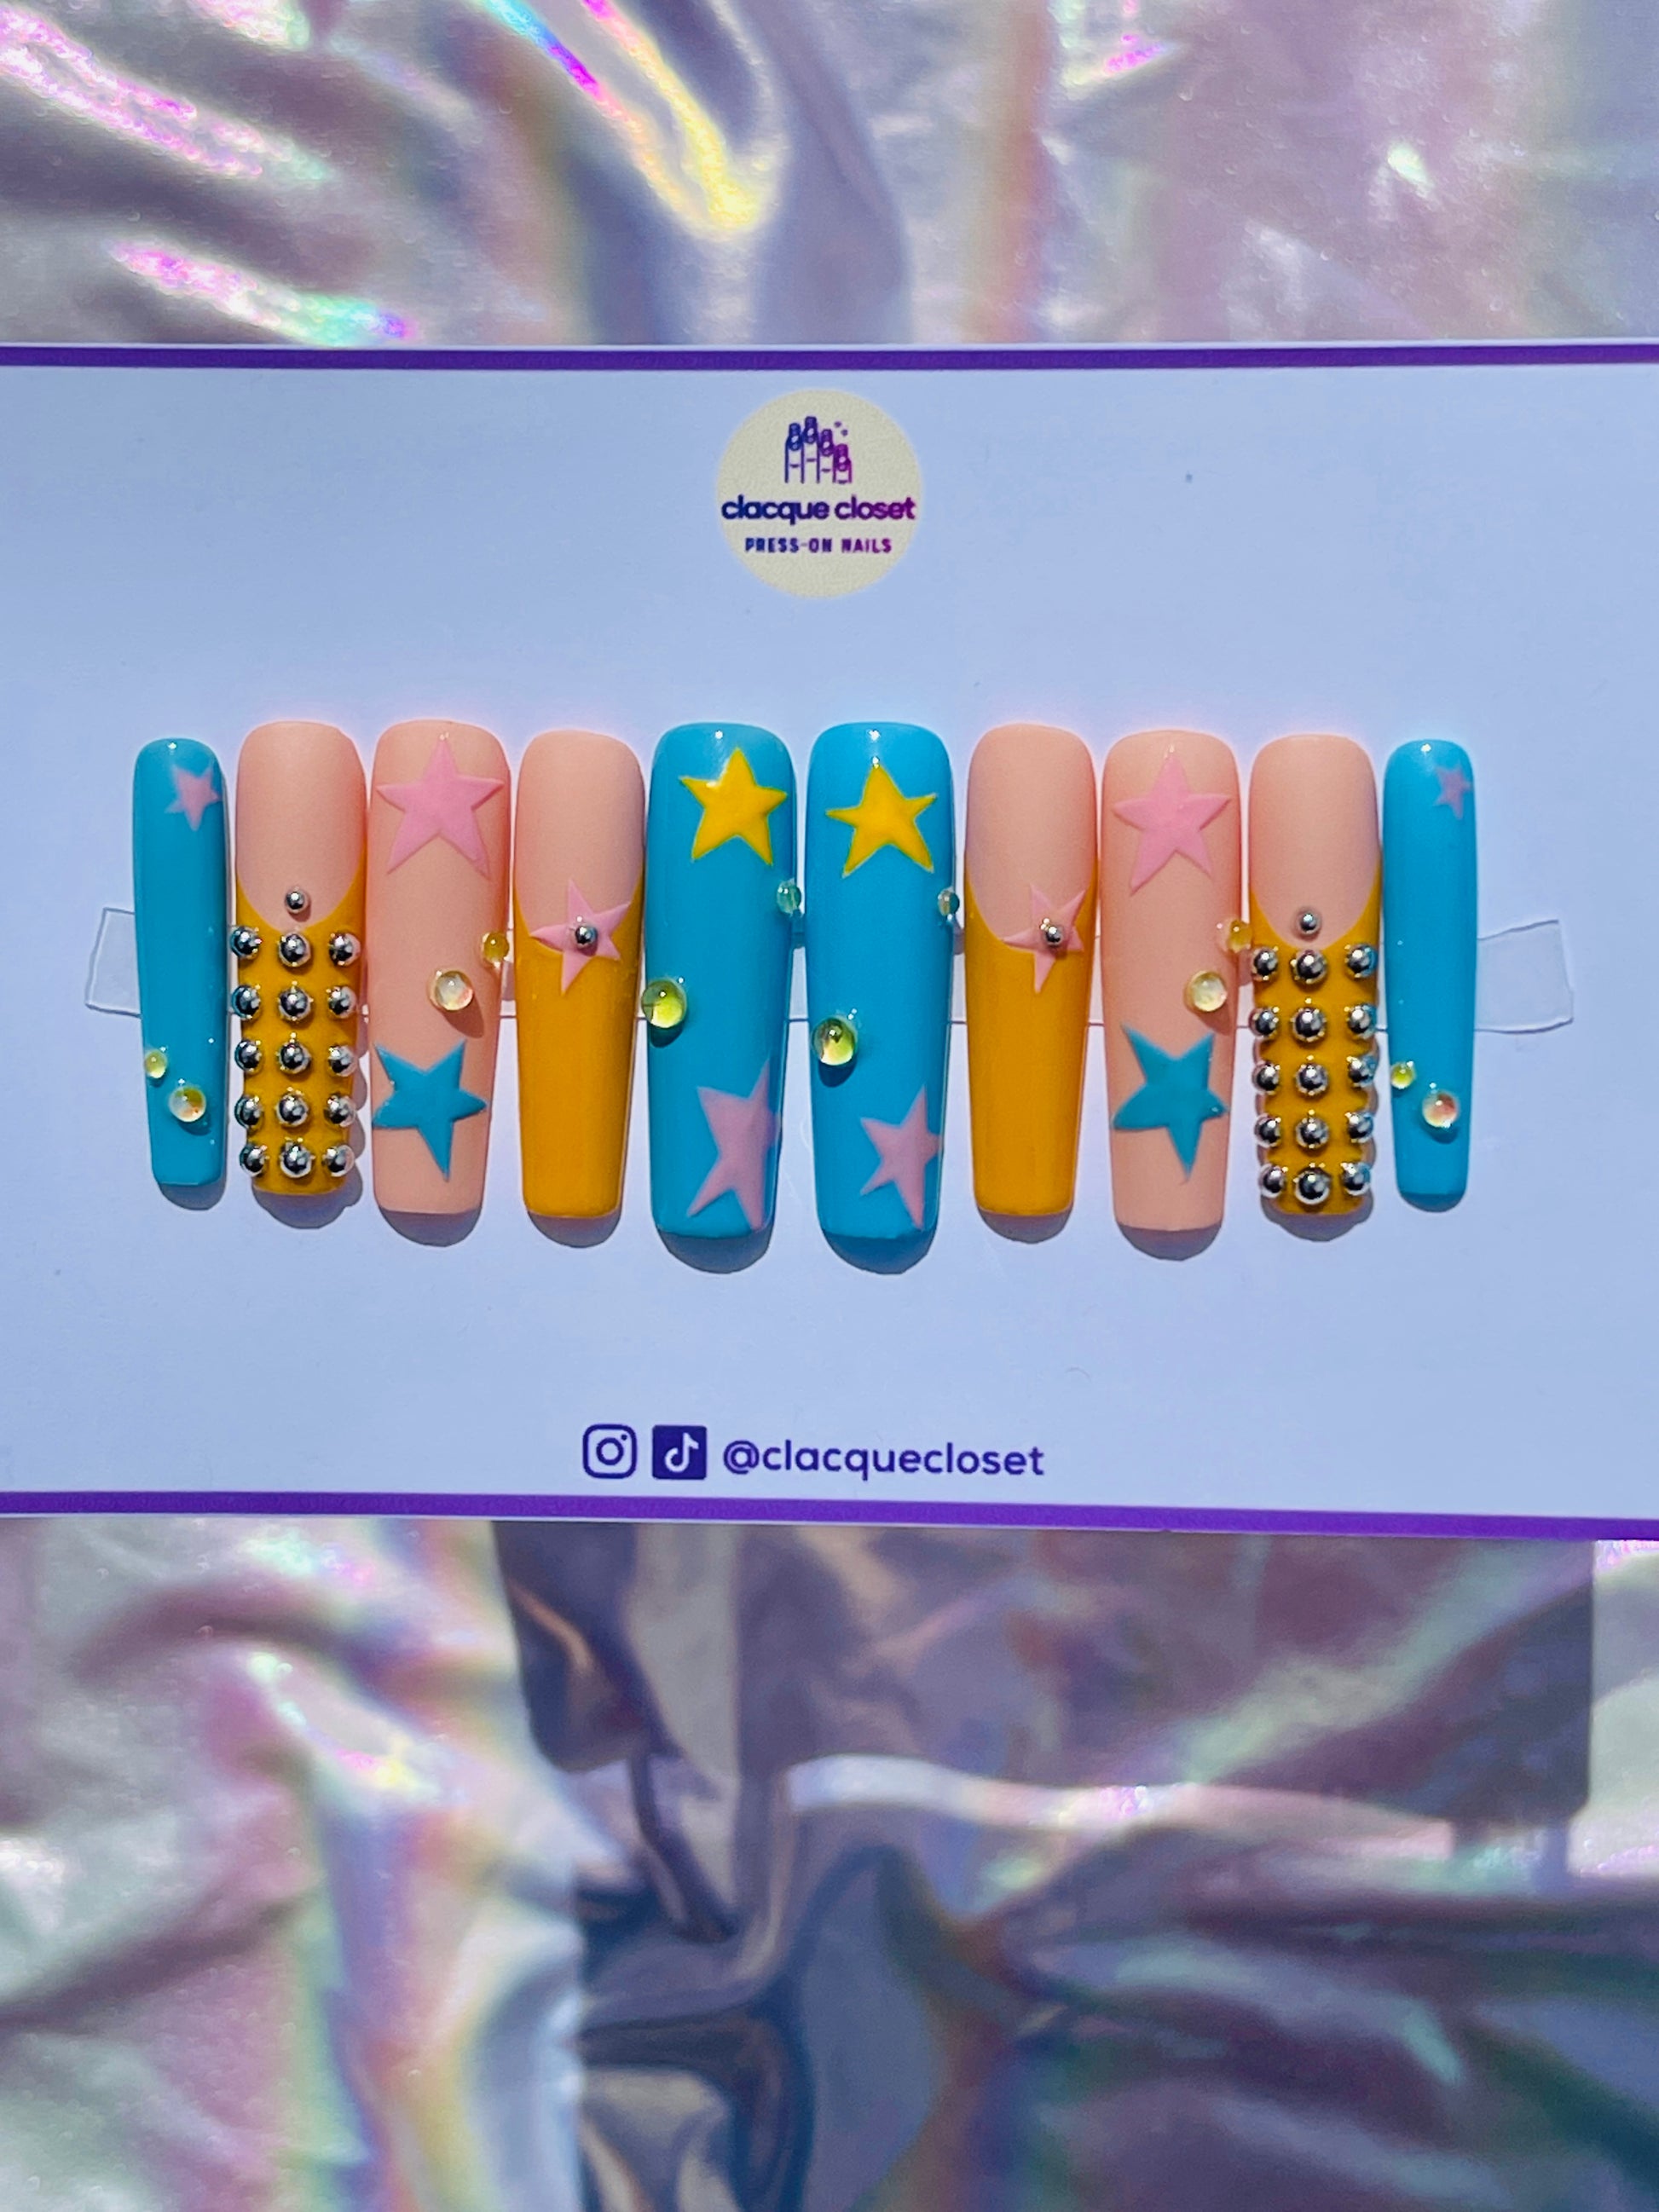 Long square nails painted with a celestial theme, showcasing blue, pink, and yellow stars scattered across a clear base, accented with tiny silver balls for added dimension.